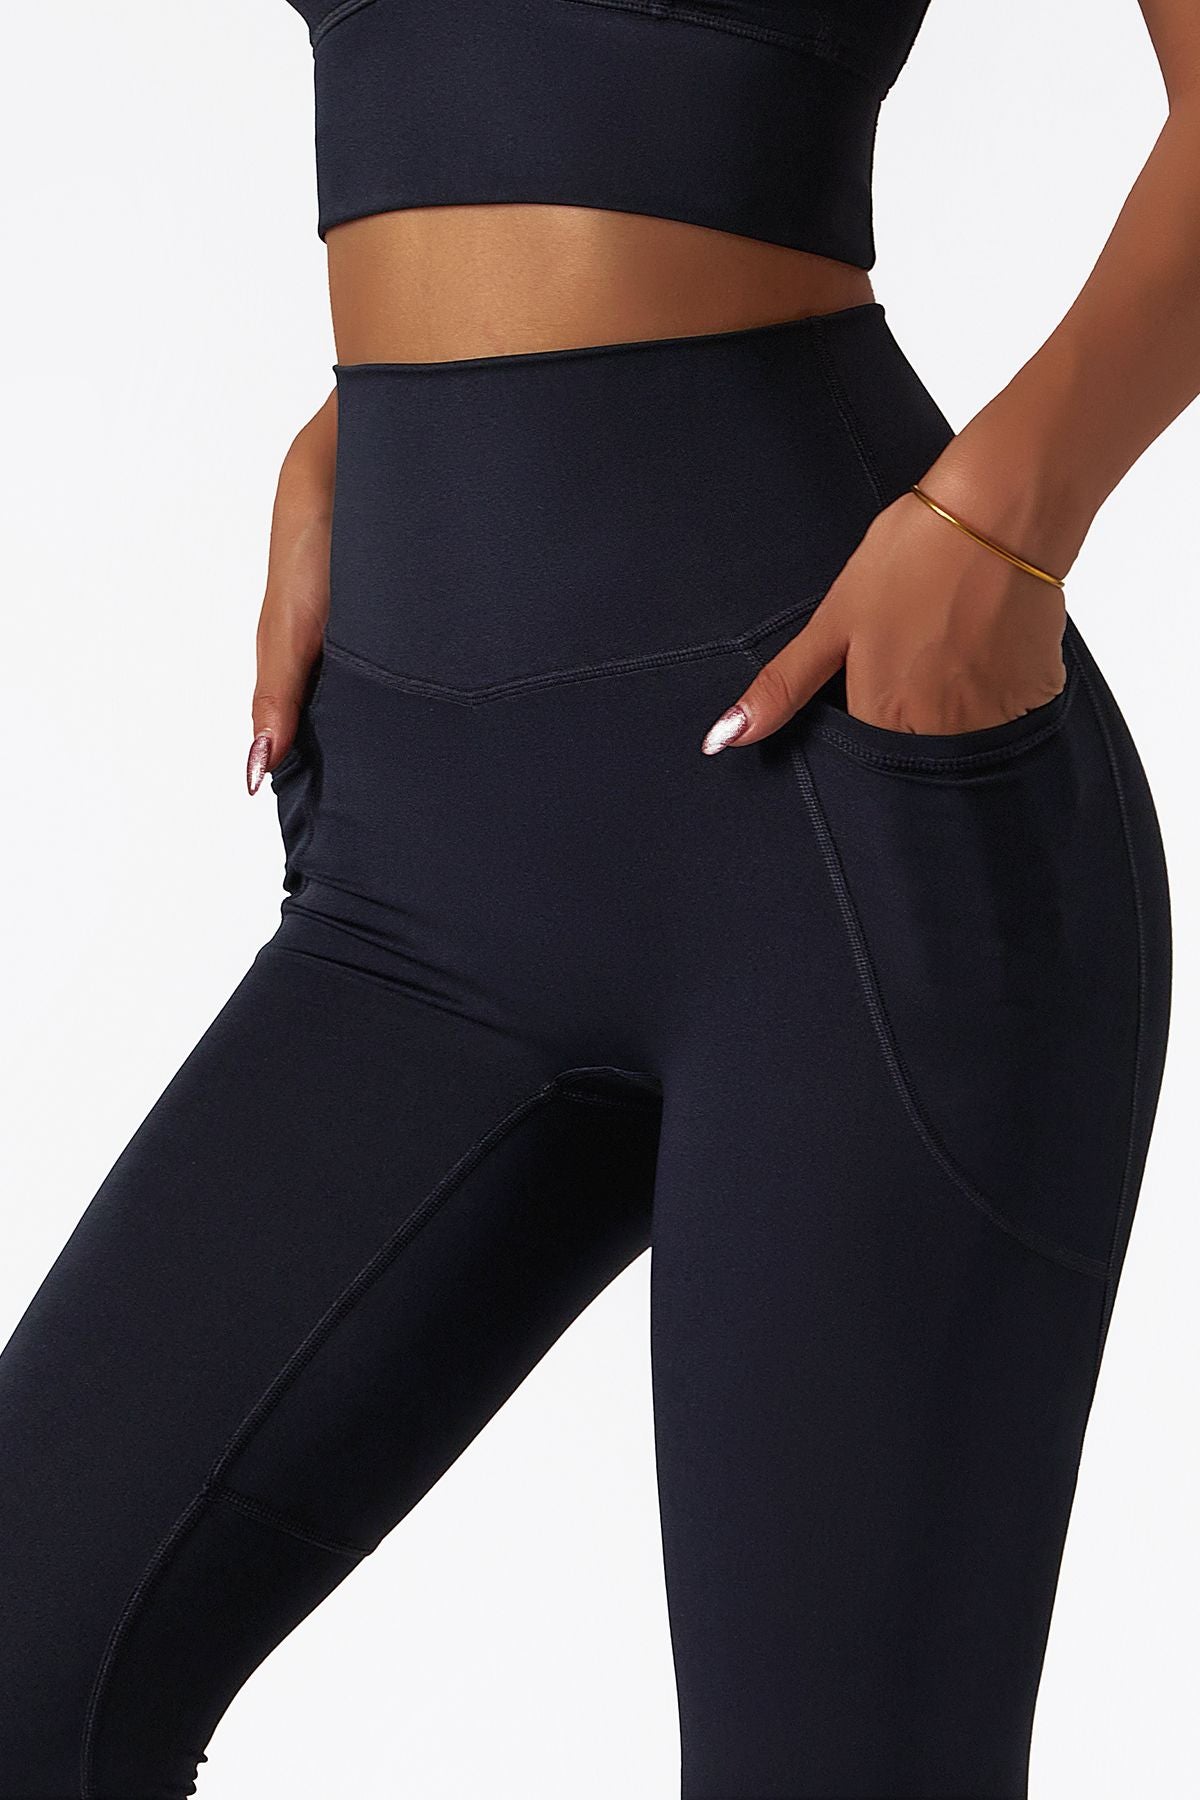 WPYYI Back Pocket Gym Leggings Shorts High Waist Sport Leggings Women  Fitness Shorts Workout Yoga Pants Running Tights (Color : Black, Size : L  Code) : : Clothing, Shoes & Accessories